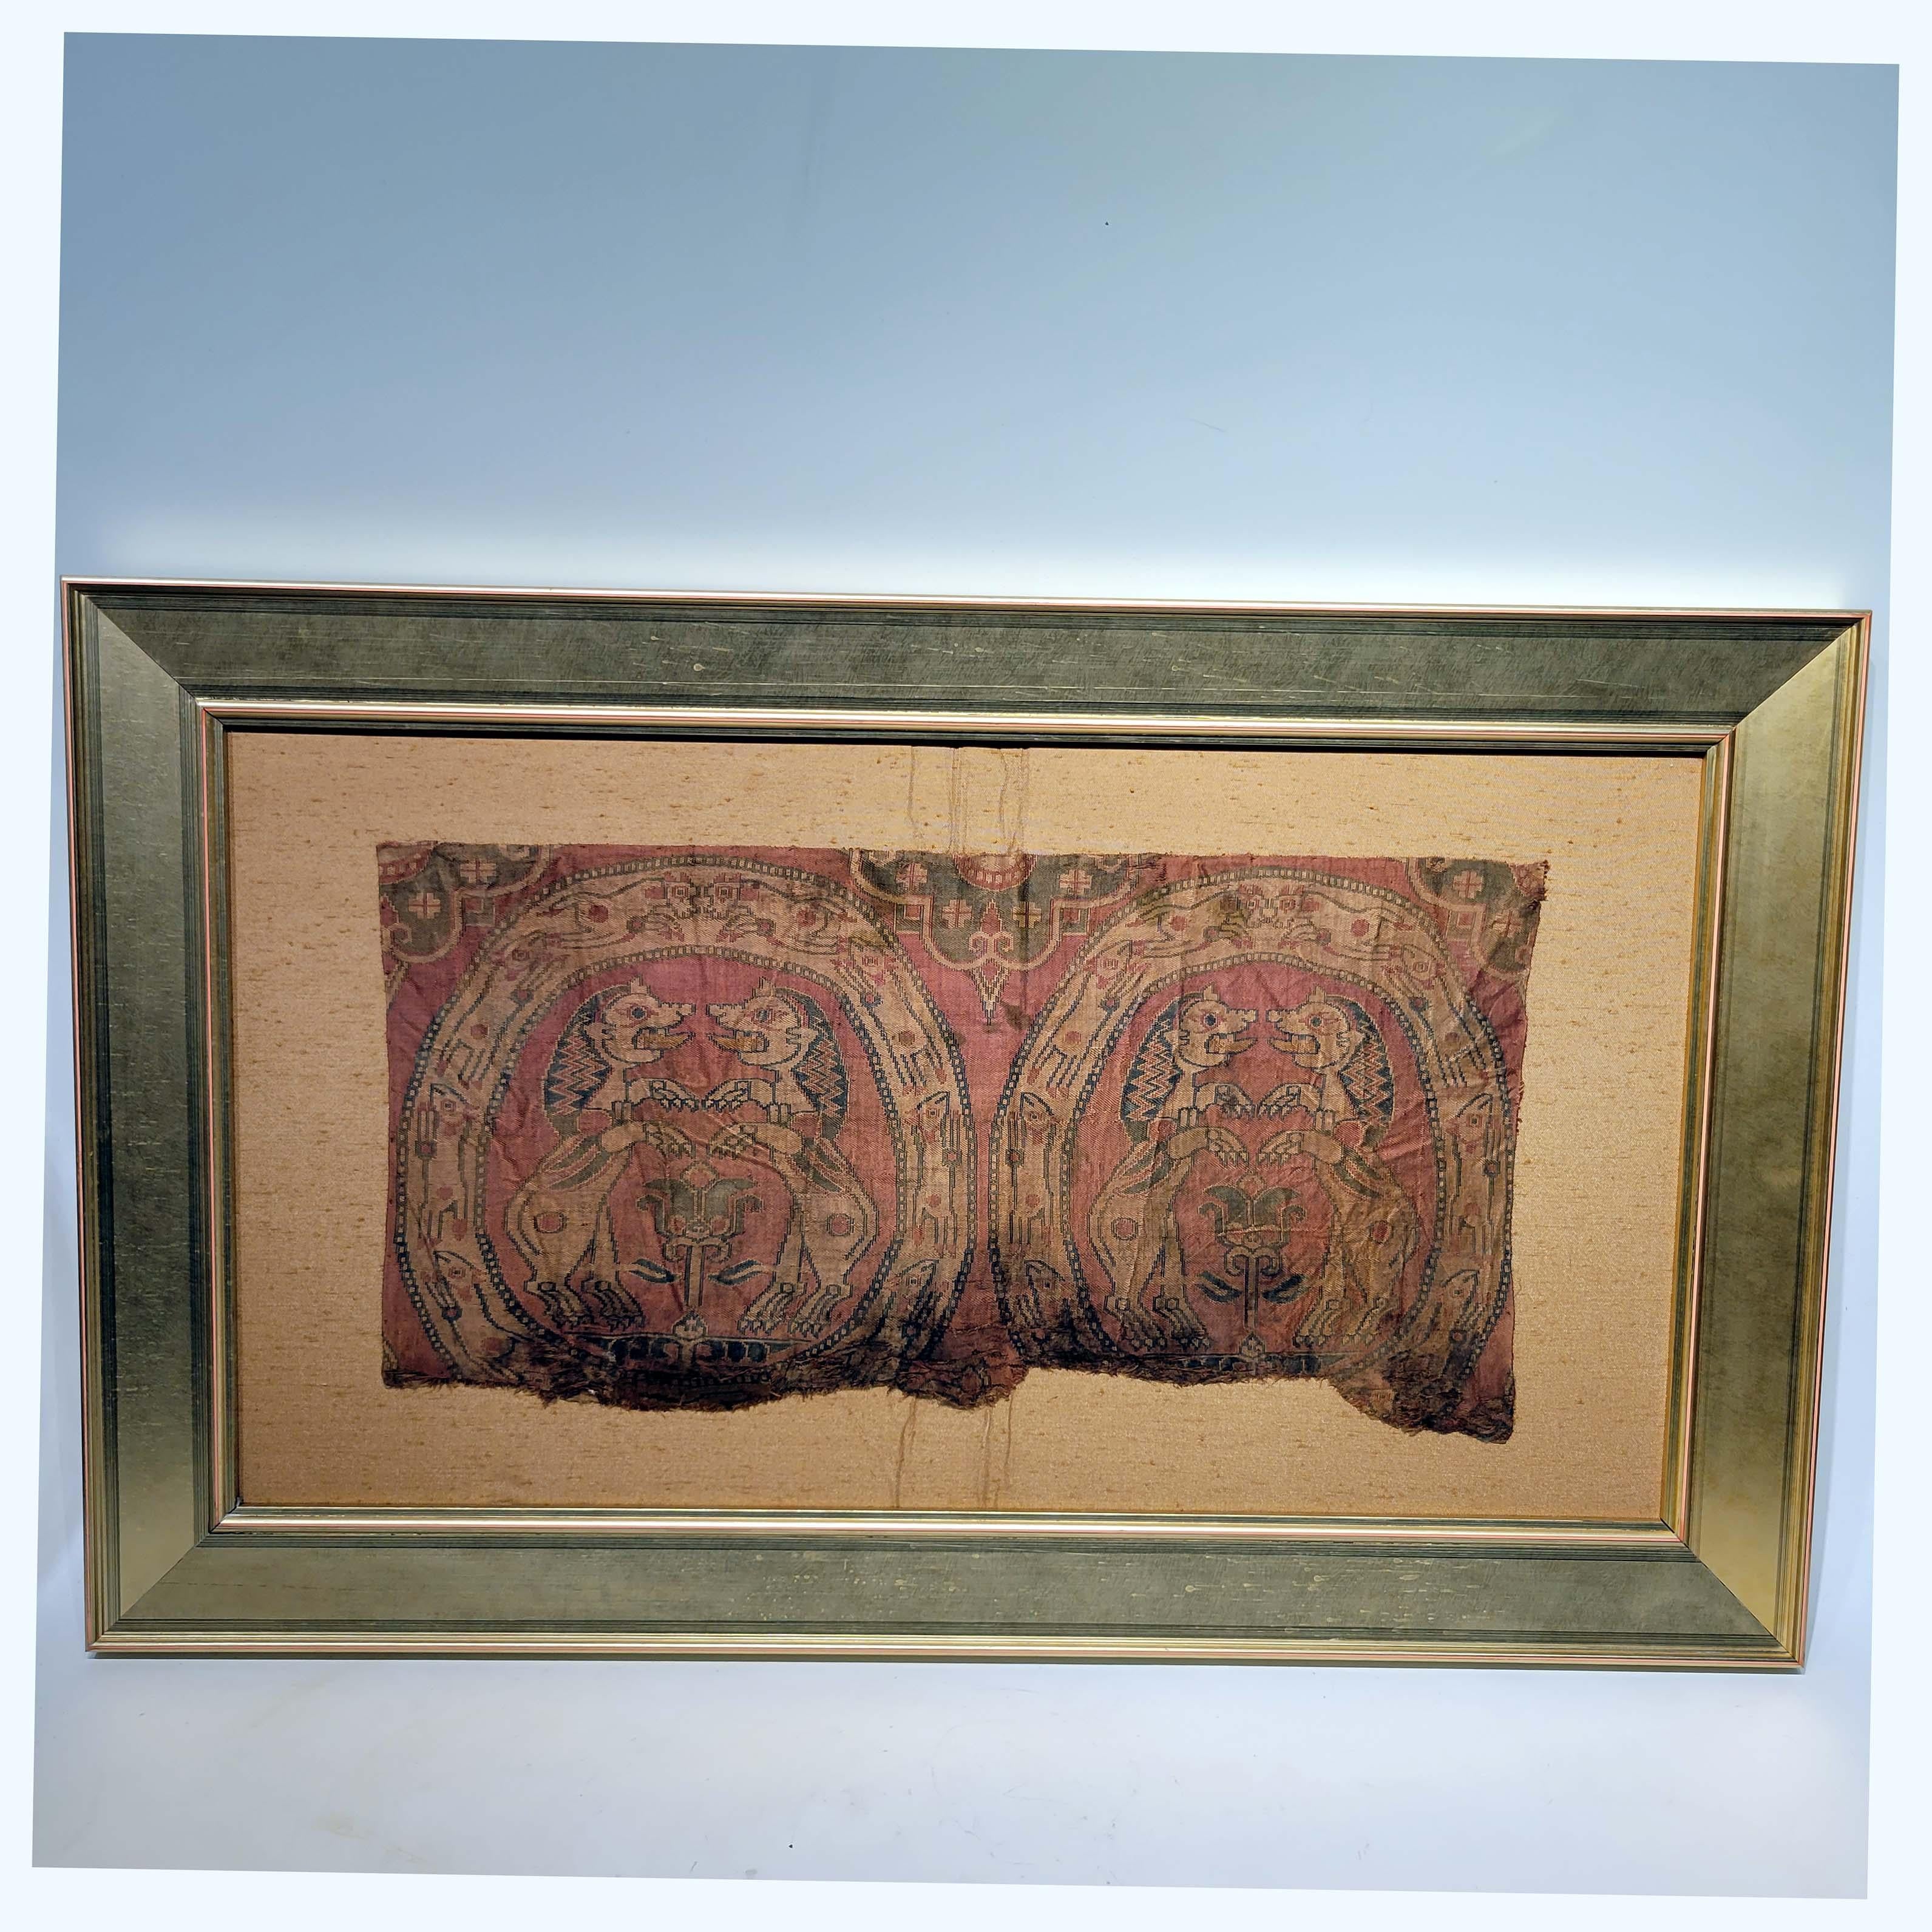 A Sogdian silk samite fragment with confronting lions
Central Asia, 7th-9th century
of irregular rectangular form, woven in red, blue and cream silks, depicting two large roundels enclosing two confronting lions standing on split palmettes with a